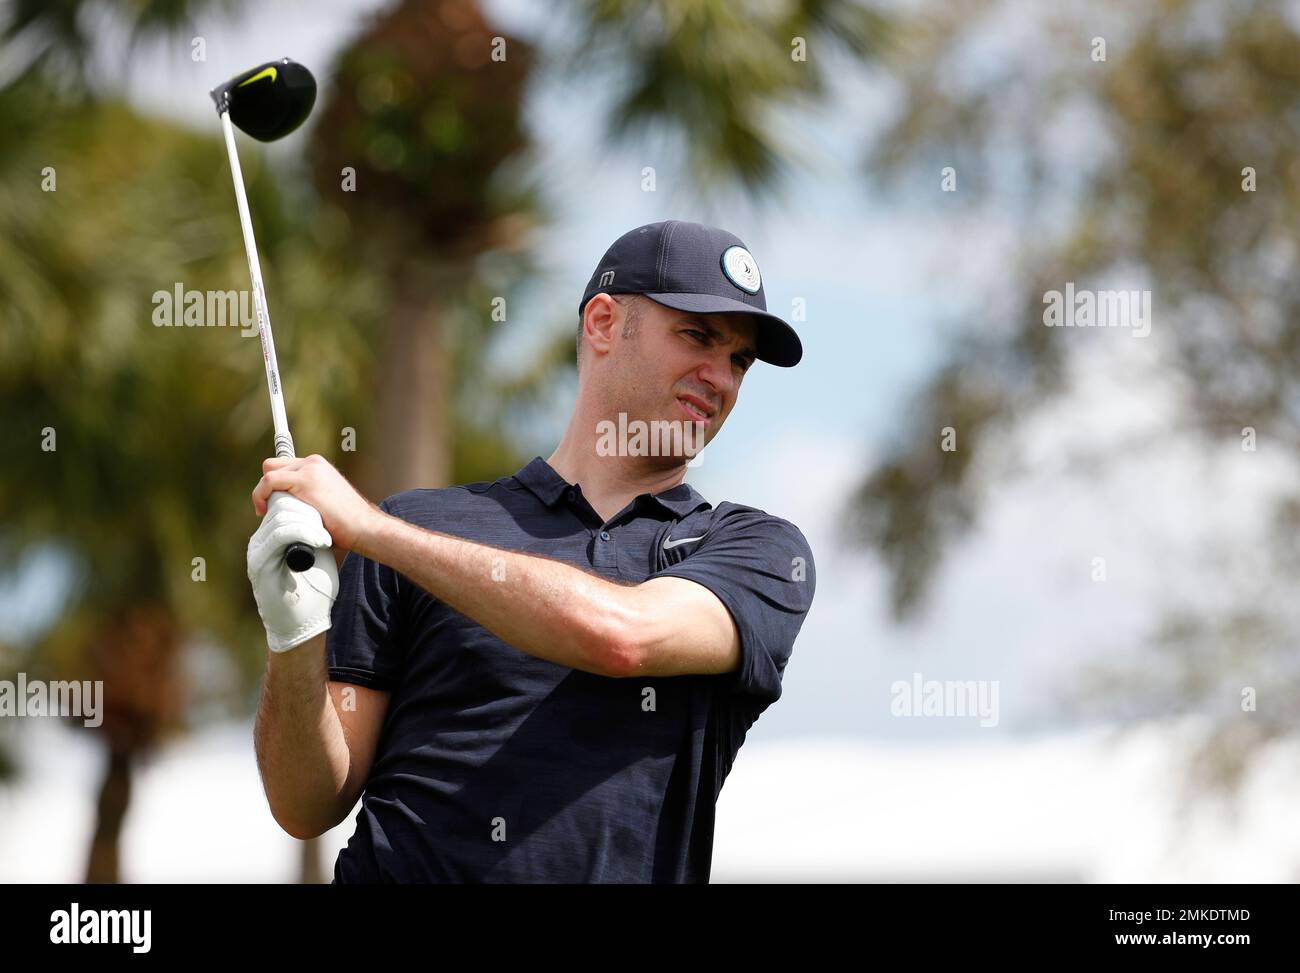 Joe Mauer at 40: A little golf, a little relaxation — and a lot of